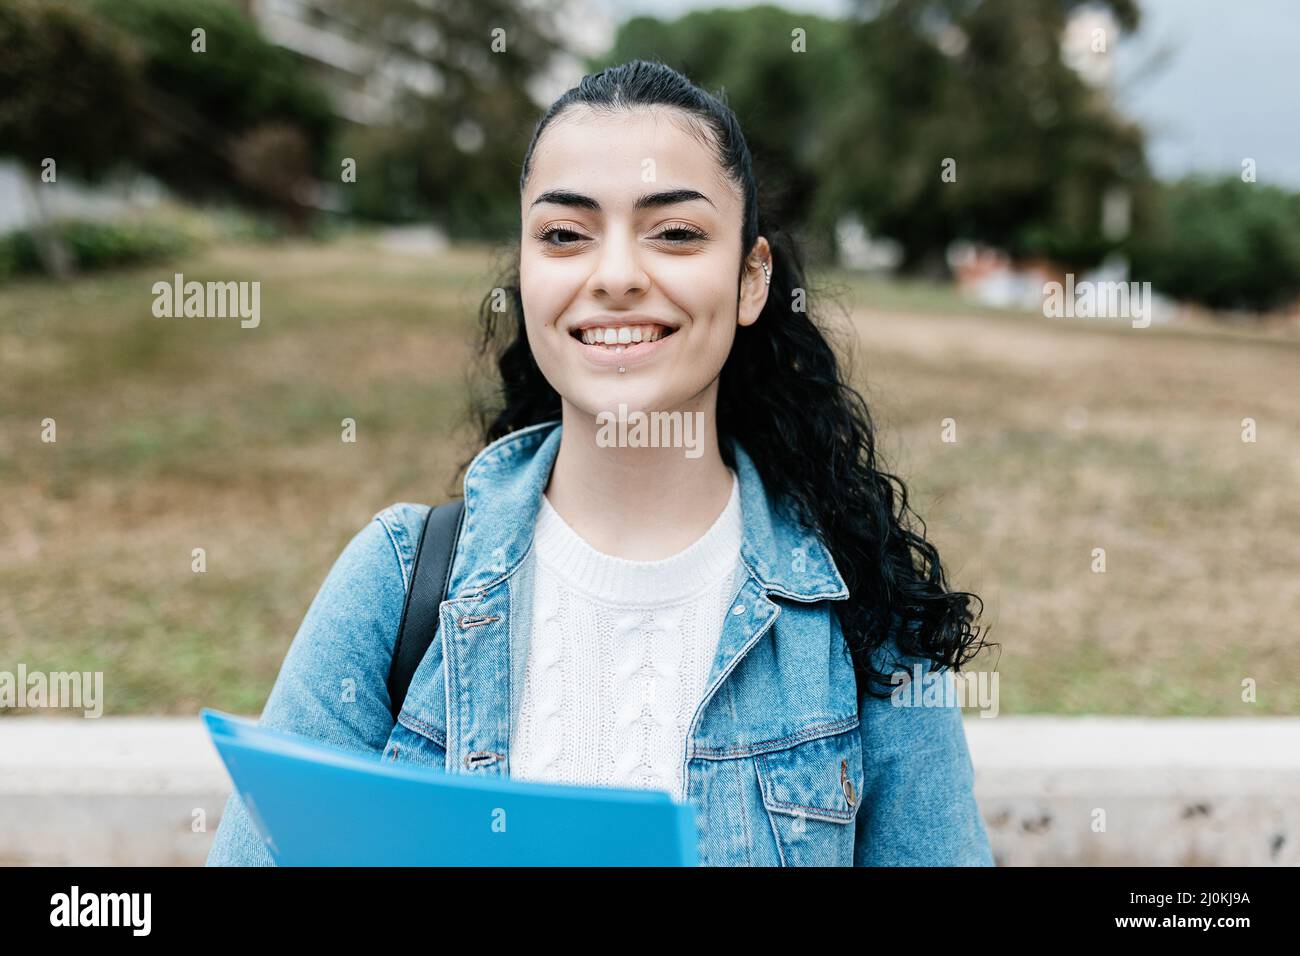 Young caucasian female student smiling at camera Stock Photo